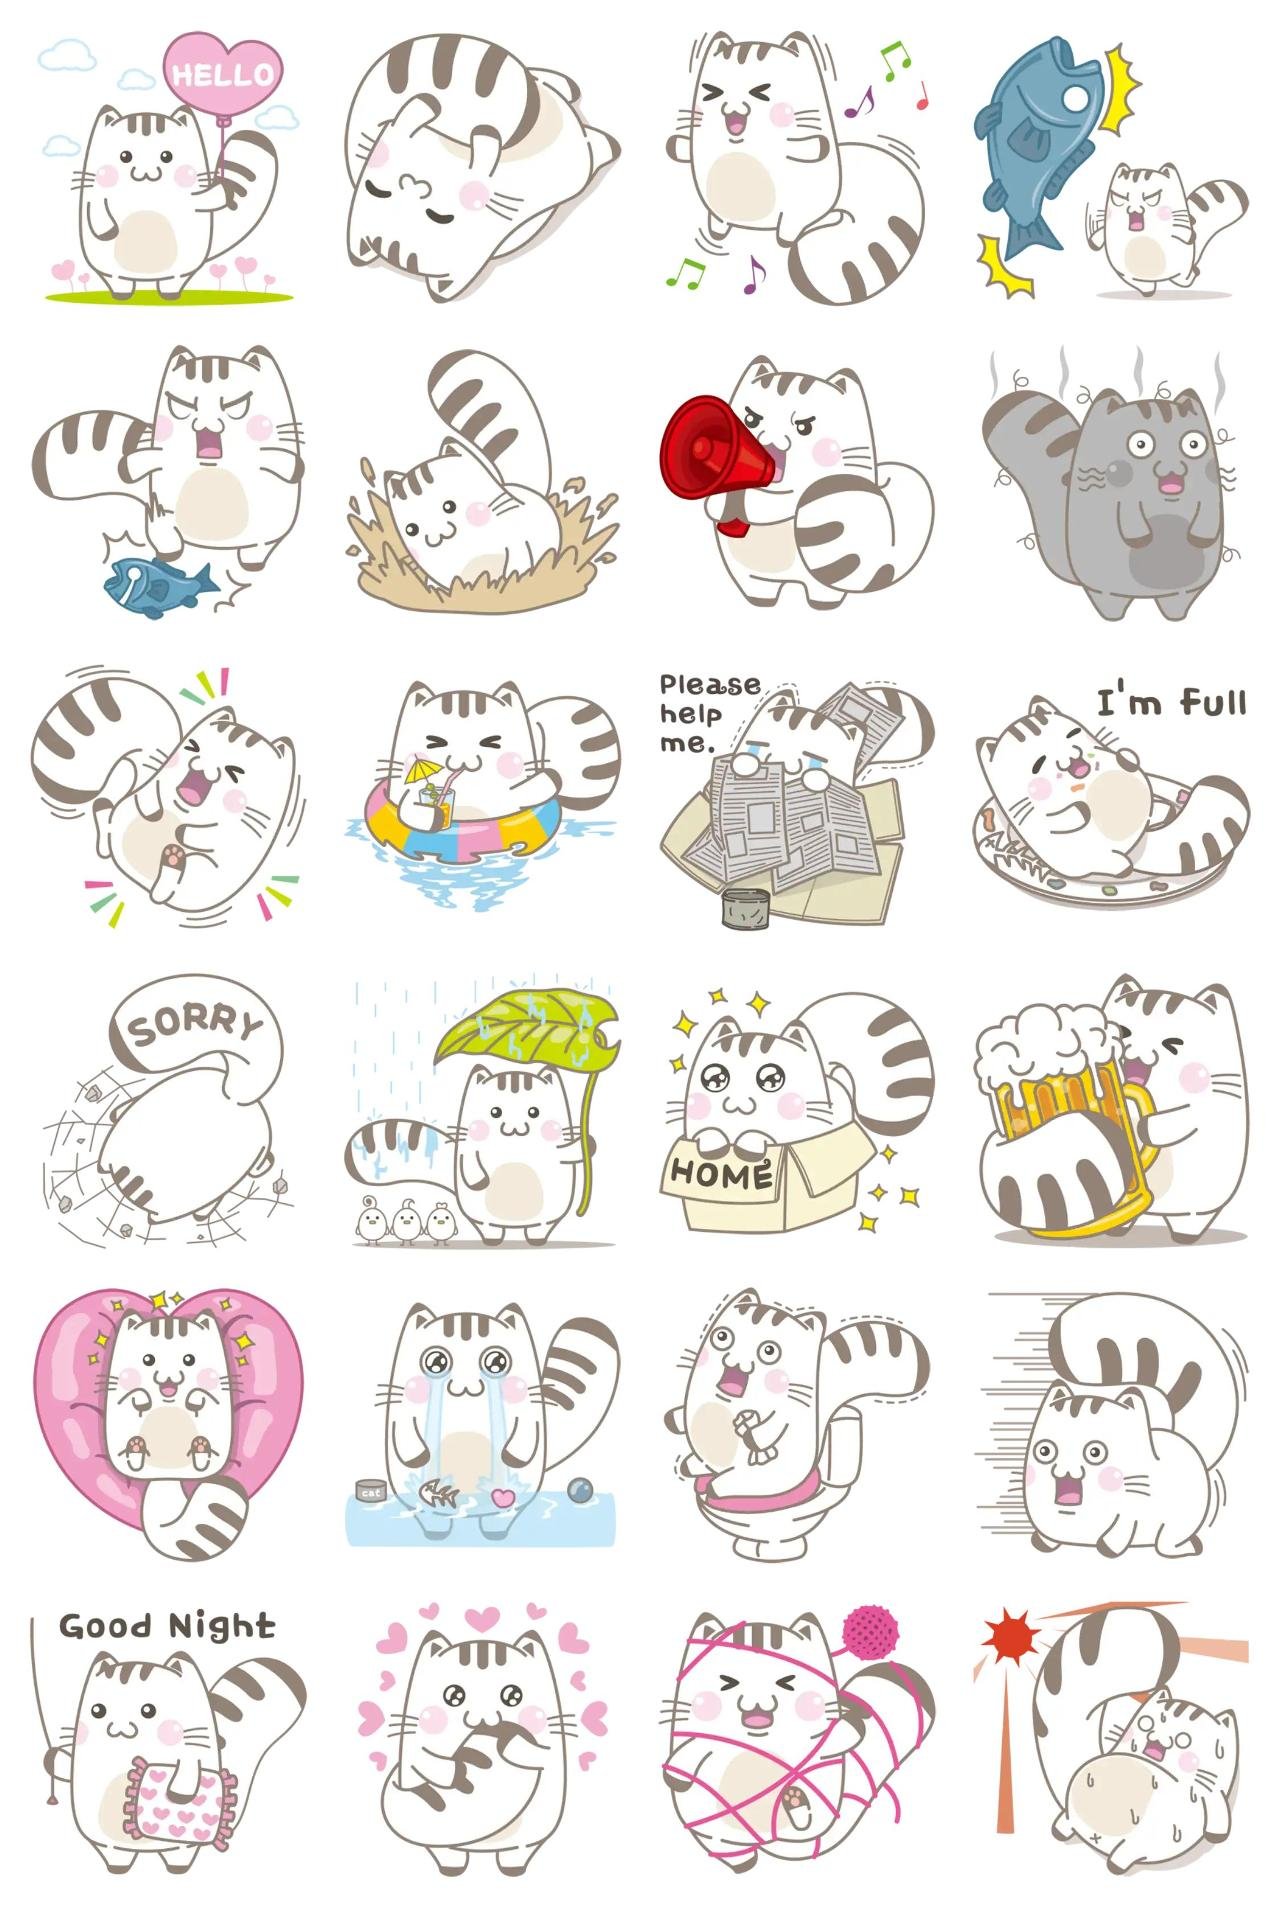 Kkonyang Animals,Gag sticker pack for Whatsapp, Telegram, Signal, and others chatting and message apps